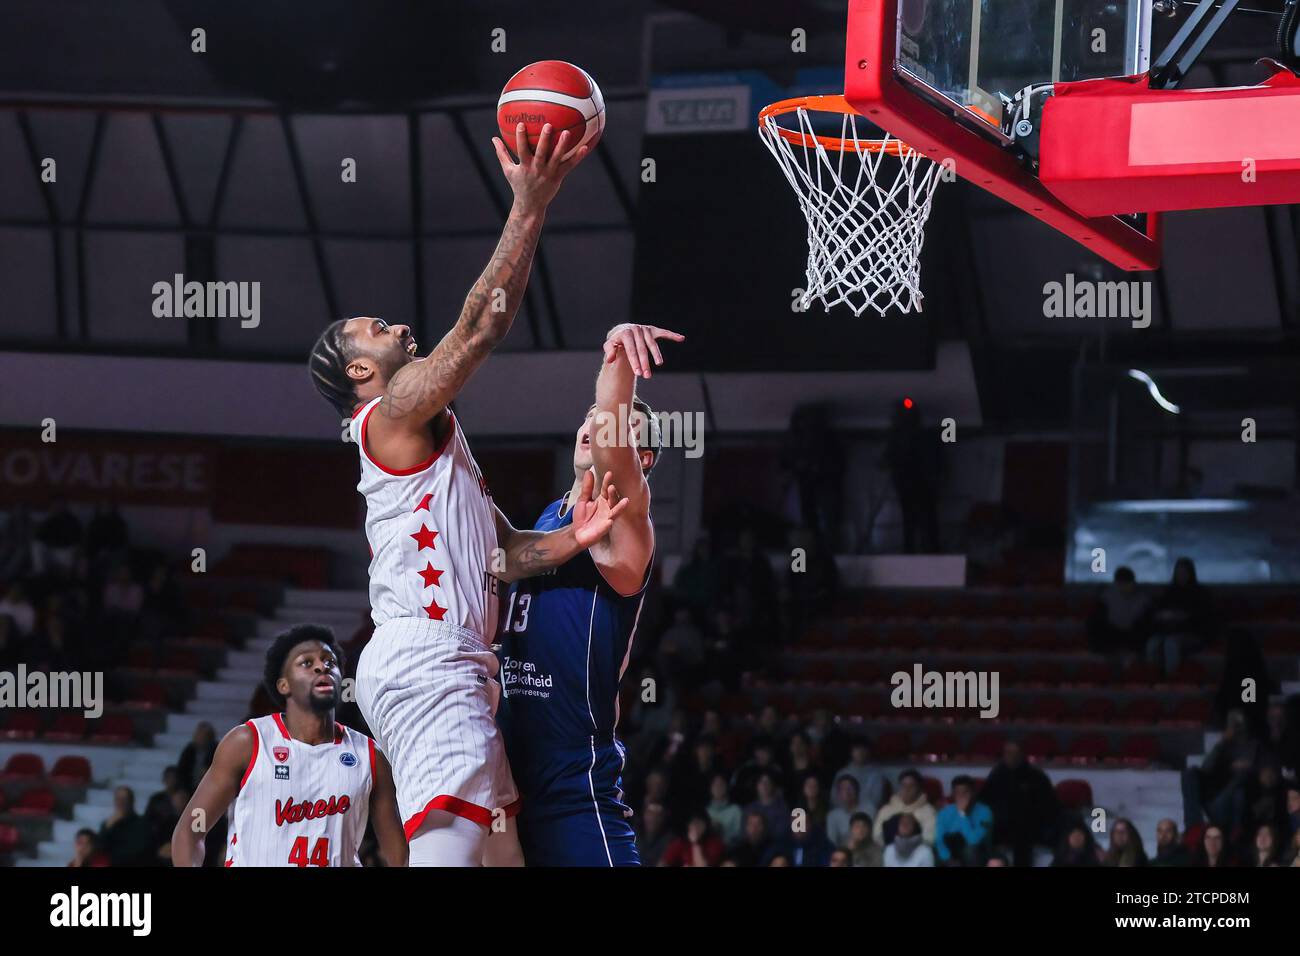 Varese, Italy. 13th Dec, 2023. James Young #1 of Itelyum Varese (L) and Luuk Van Bree #13 of ZZ Leiden (R) seen in action during the FIBA Europe Cup 2023/24 Second Round Group N game between Itelyum Varese and ZZ Leiden at Itelyum Arena. Final score; Itelyum Varese 79:82 ZZ Leiden. (Photo by Fabrizio Carabelli/SOPA Images/Sipa USA) Credit: Sipa USA/Alamy Live News Stock Photo